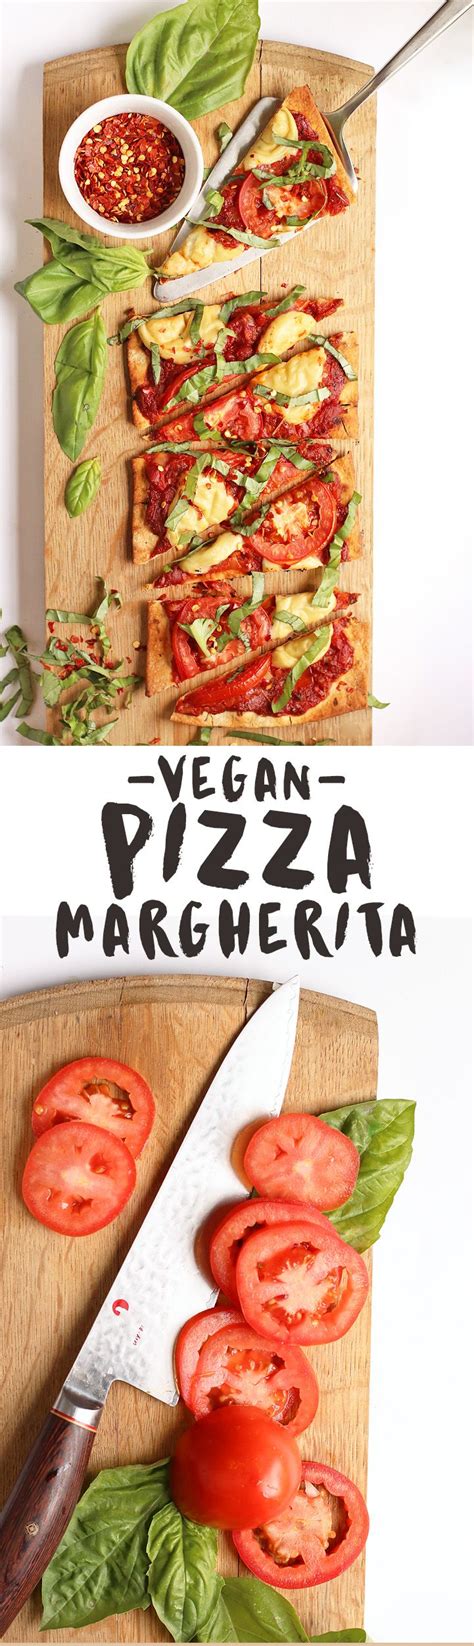 This Vegan Pizza Margherita Is Made With Homemade Tomato Sauce And